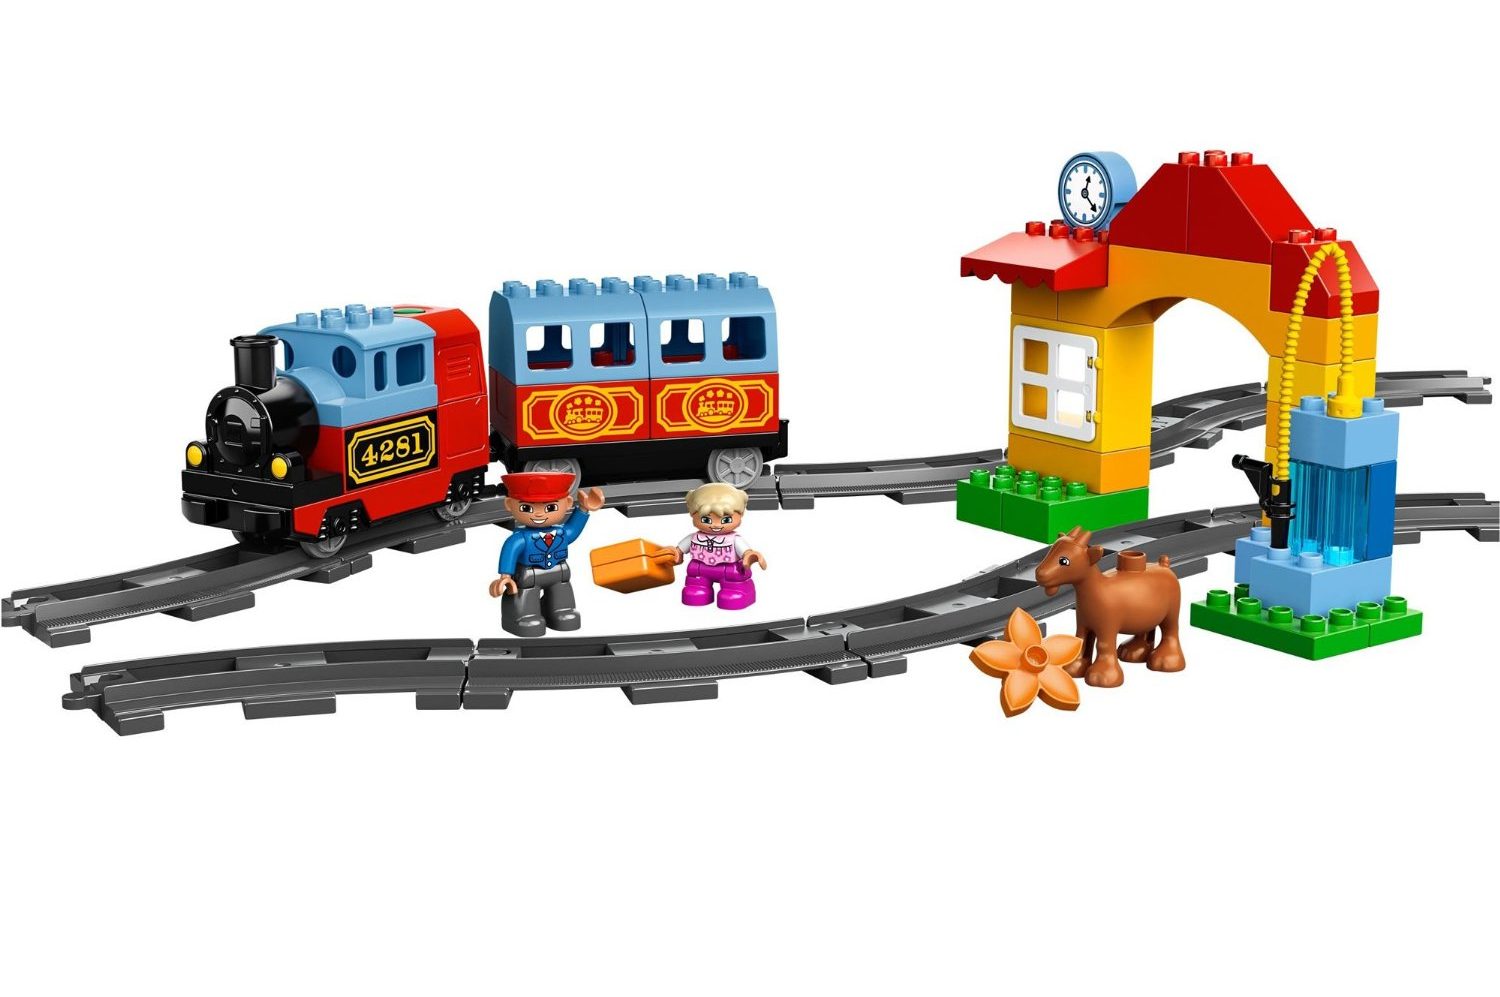 LEGO Duplo My First Train Set Only $42.49!